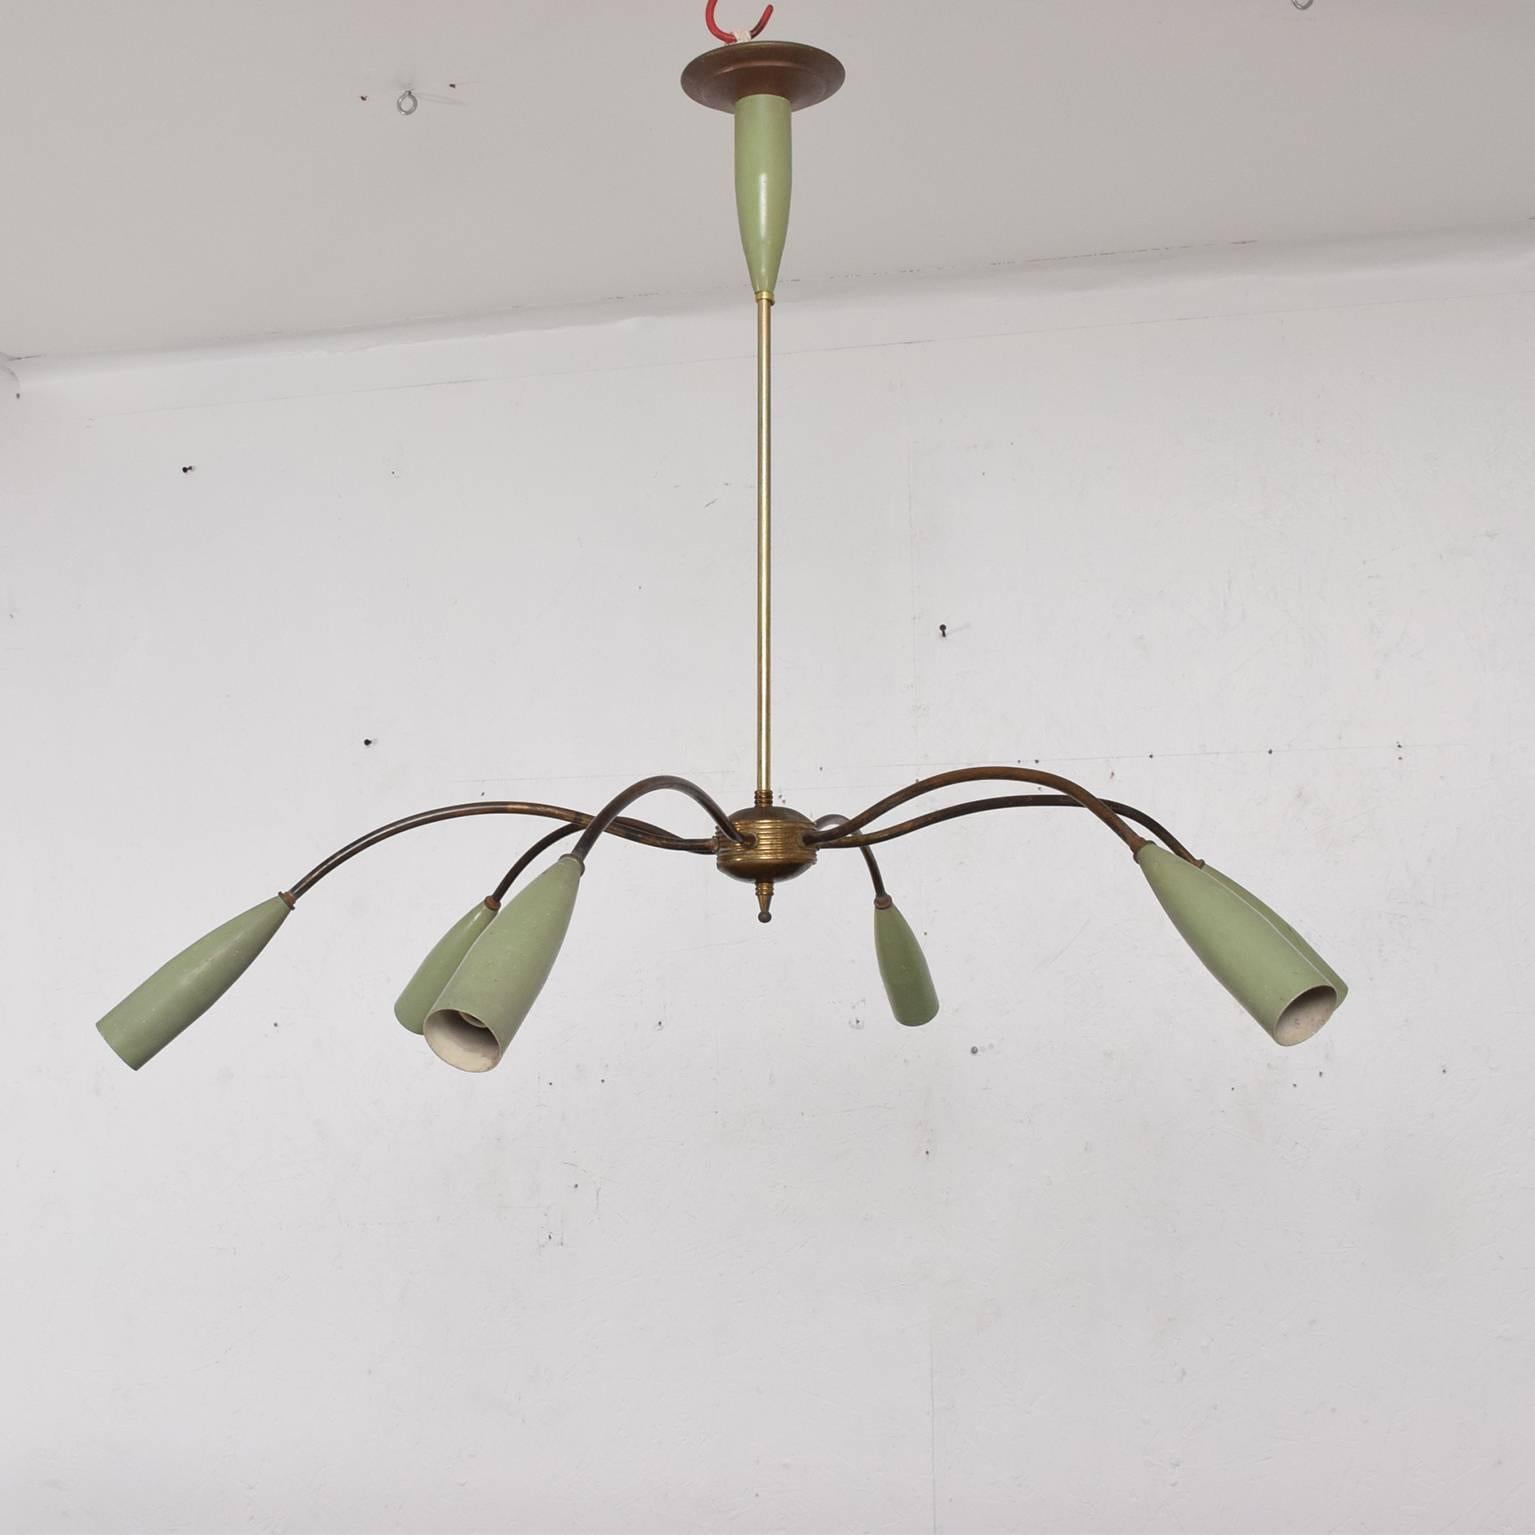 For your consideration a vintage Italian Modern chandelier with six sculptural arms. 
Made in Italy, circa 1950s.

Rewired. Original paint and patina. It requires E-14 bulbs (not included).
Dimensions: 26